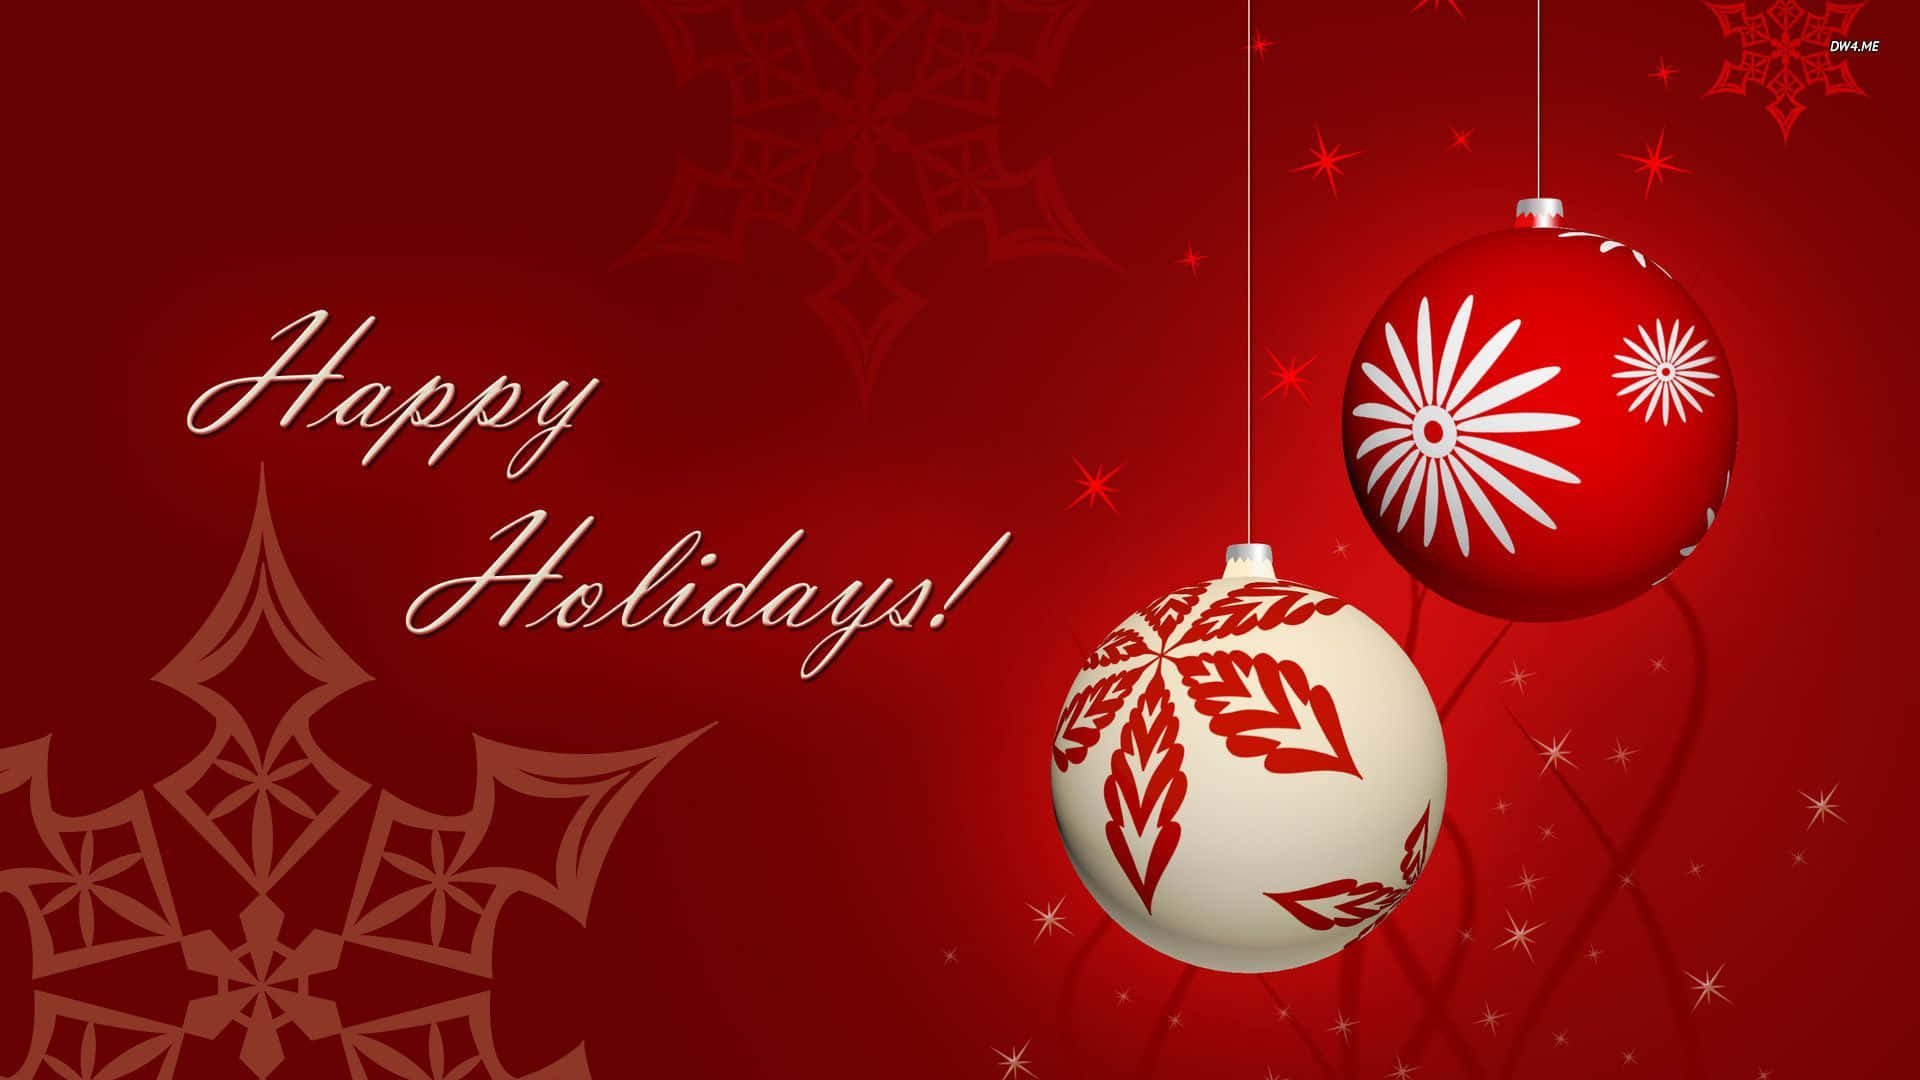 Happy Holidays from All of Us Wallpaper